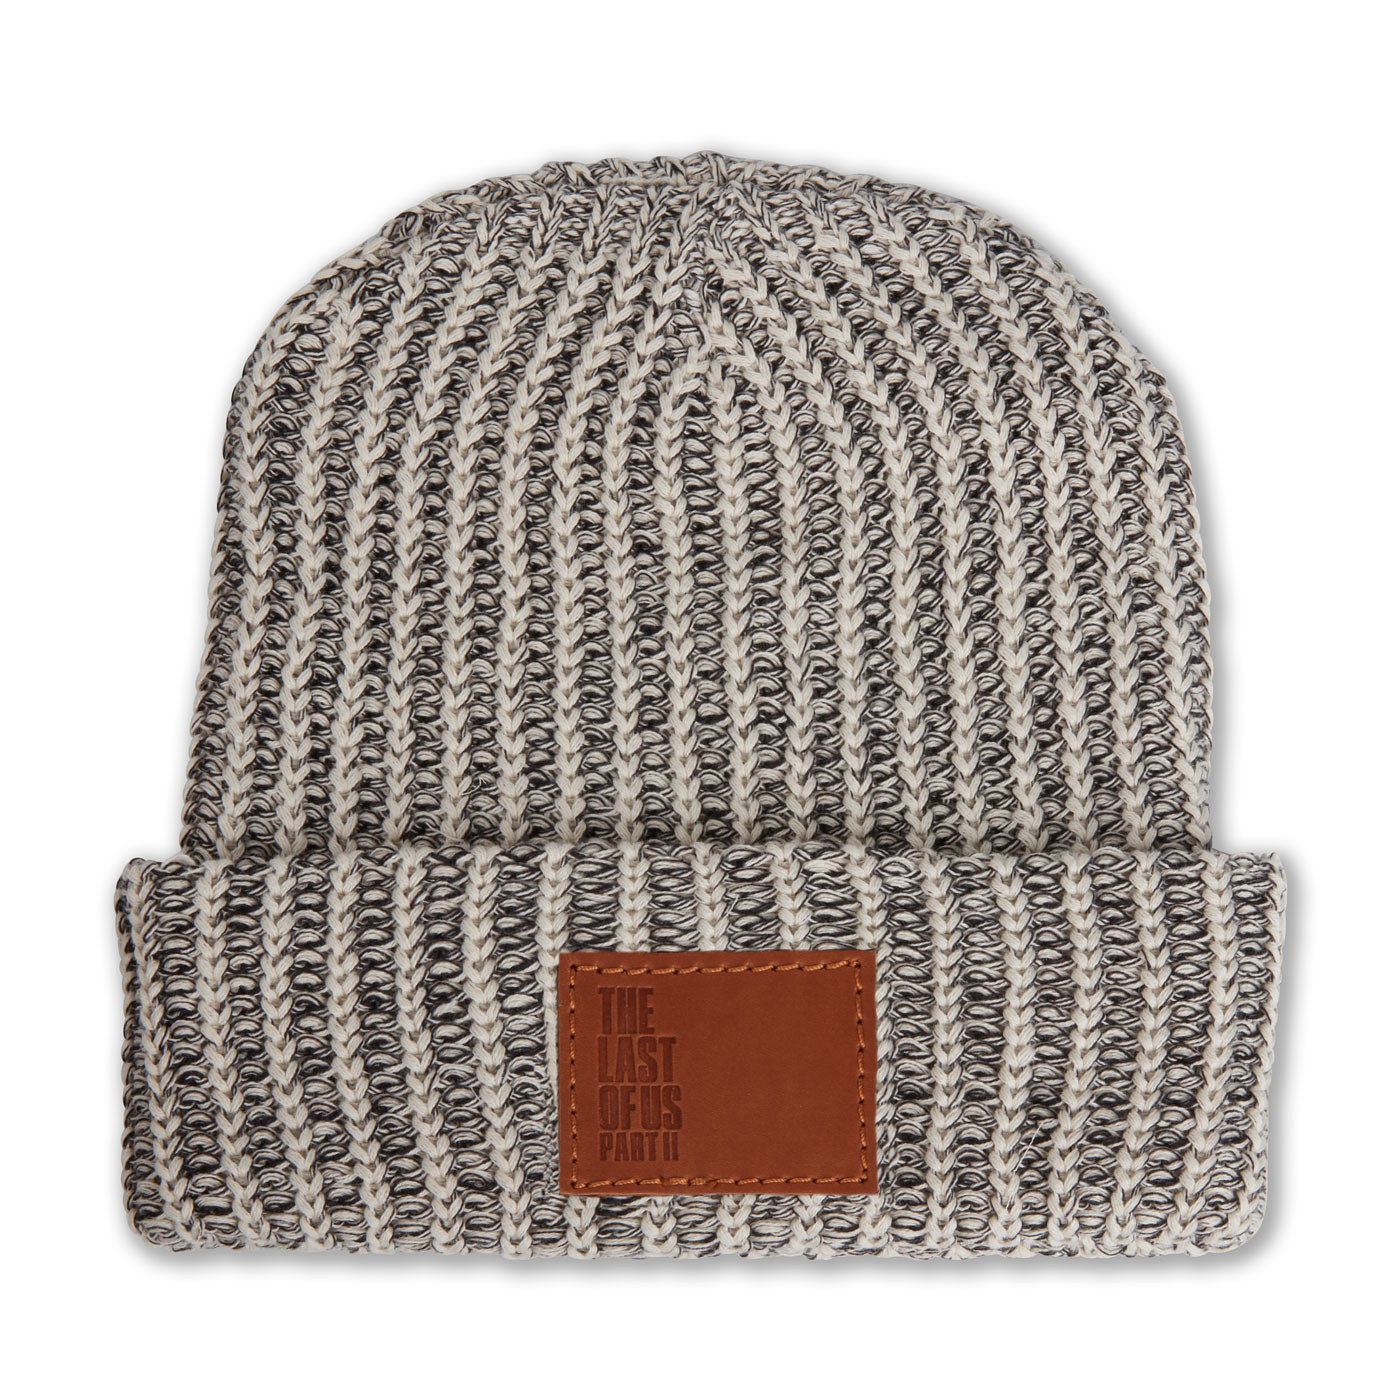 The last of us day gorro